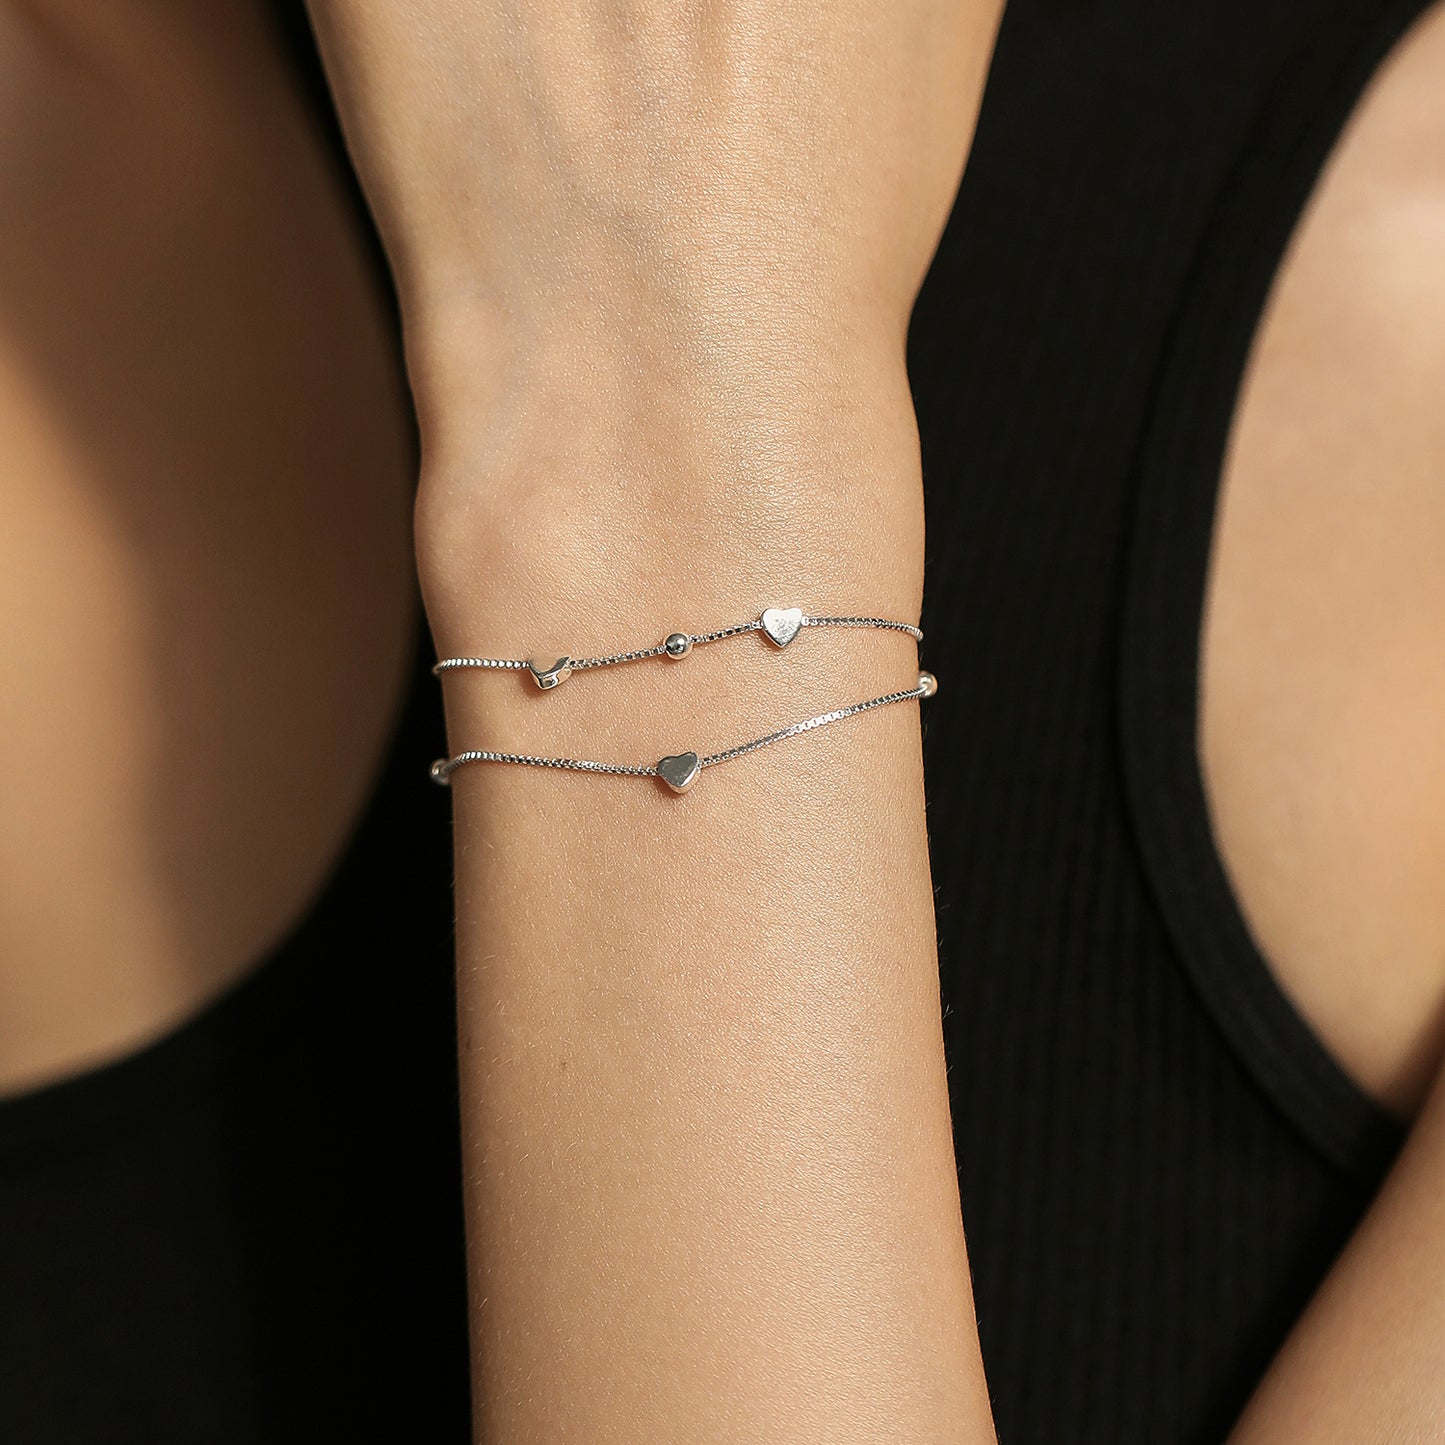 Sterling Silver Love Bracelet with Chic Box Chain